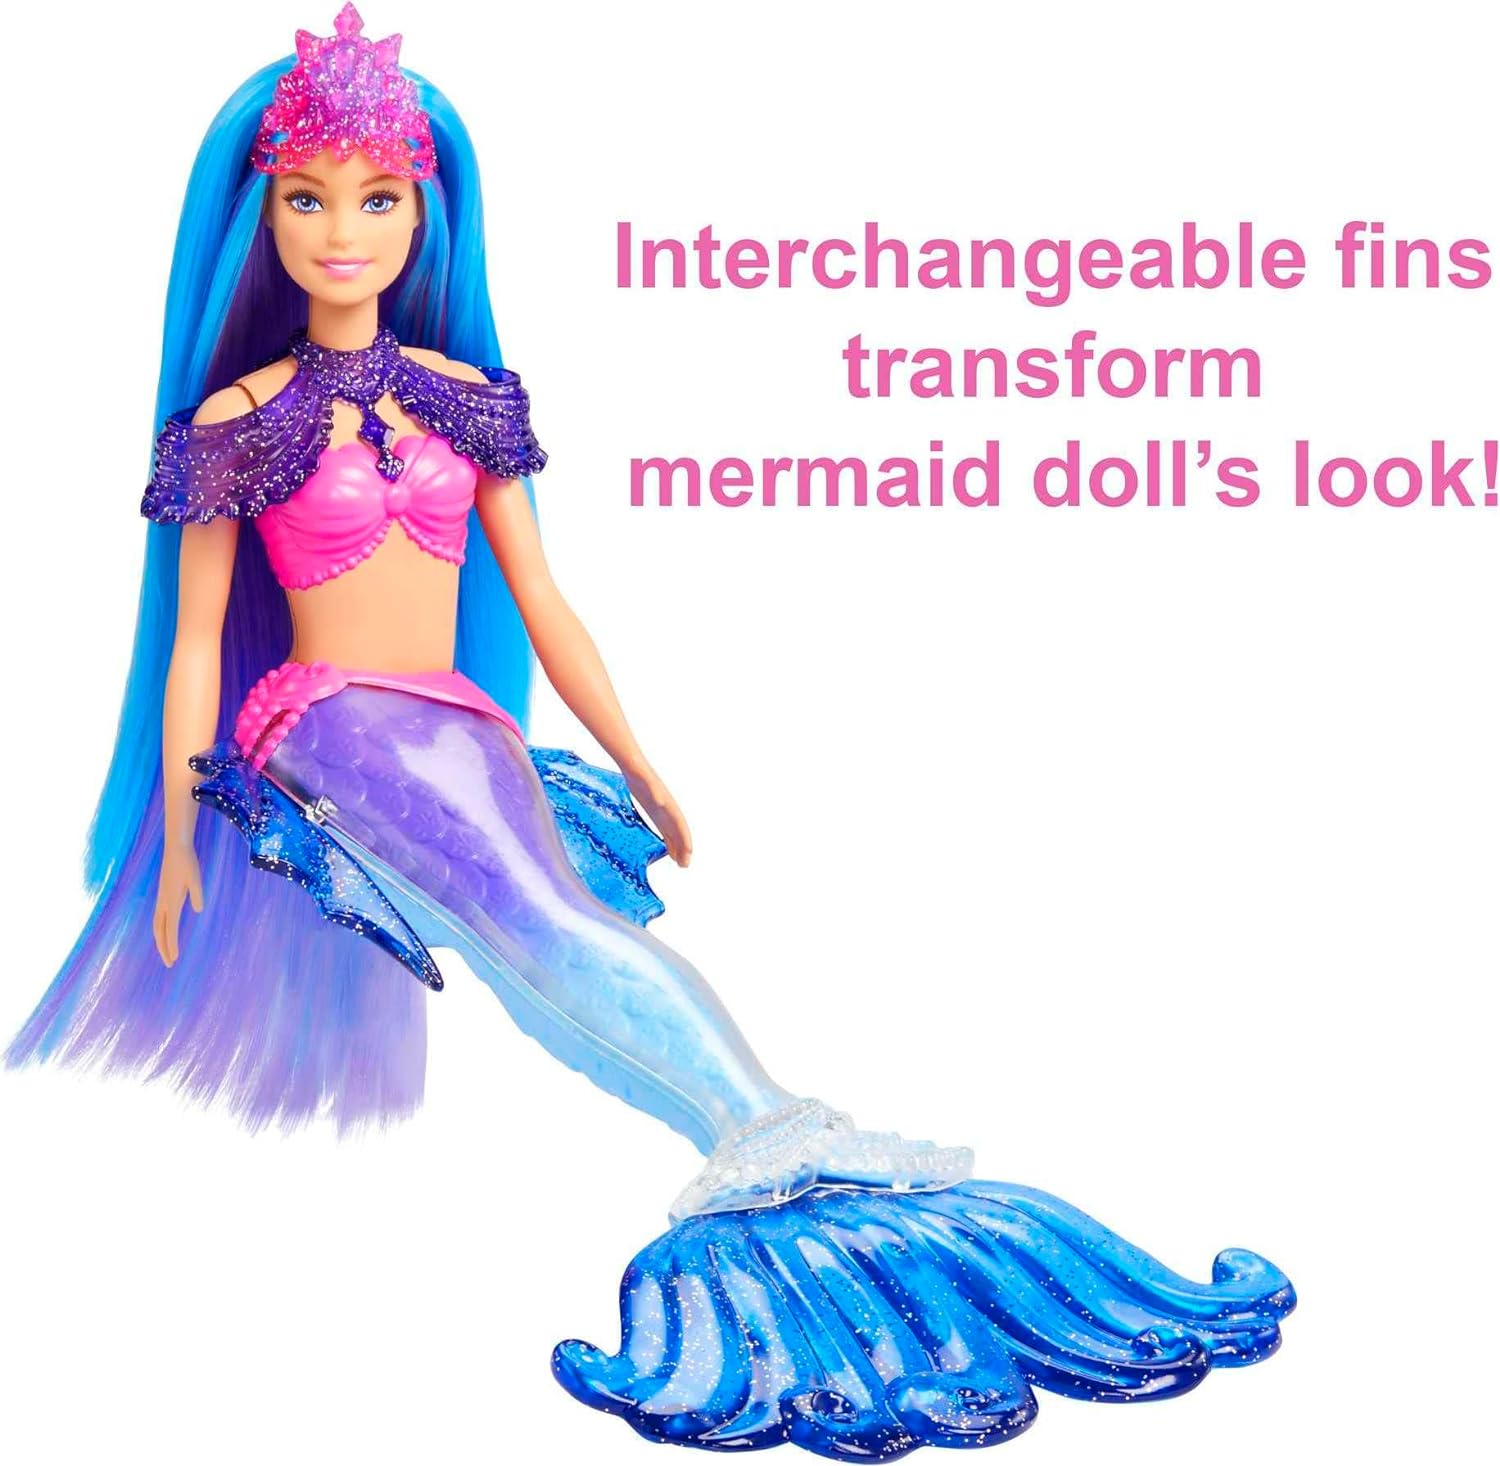 Barbie Mermaid Power Doll & Accessories Set with Mermaid Fashion Doll, Seahorse Pet, Interchangeable Fins & 5+ Storytelling Pieces